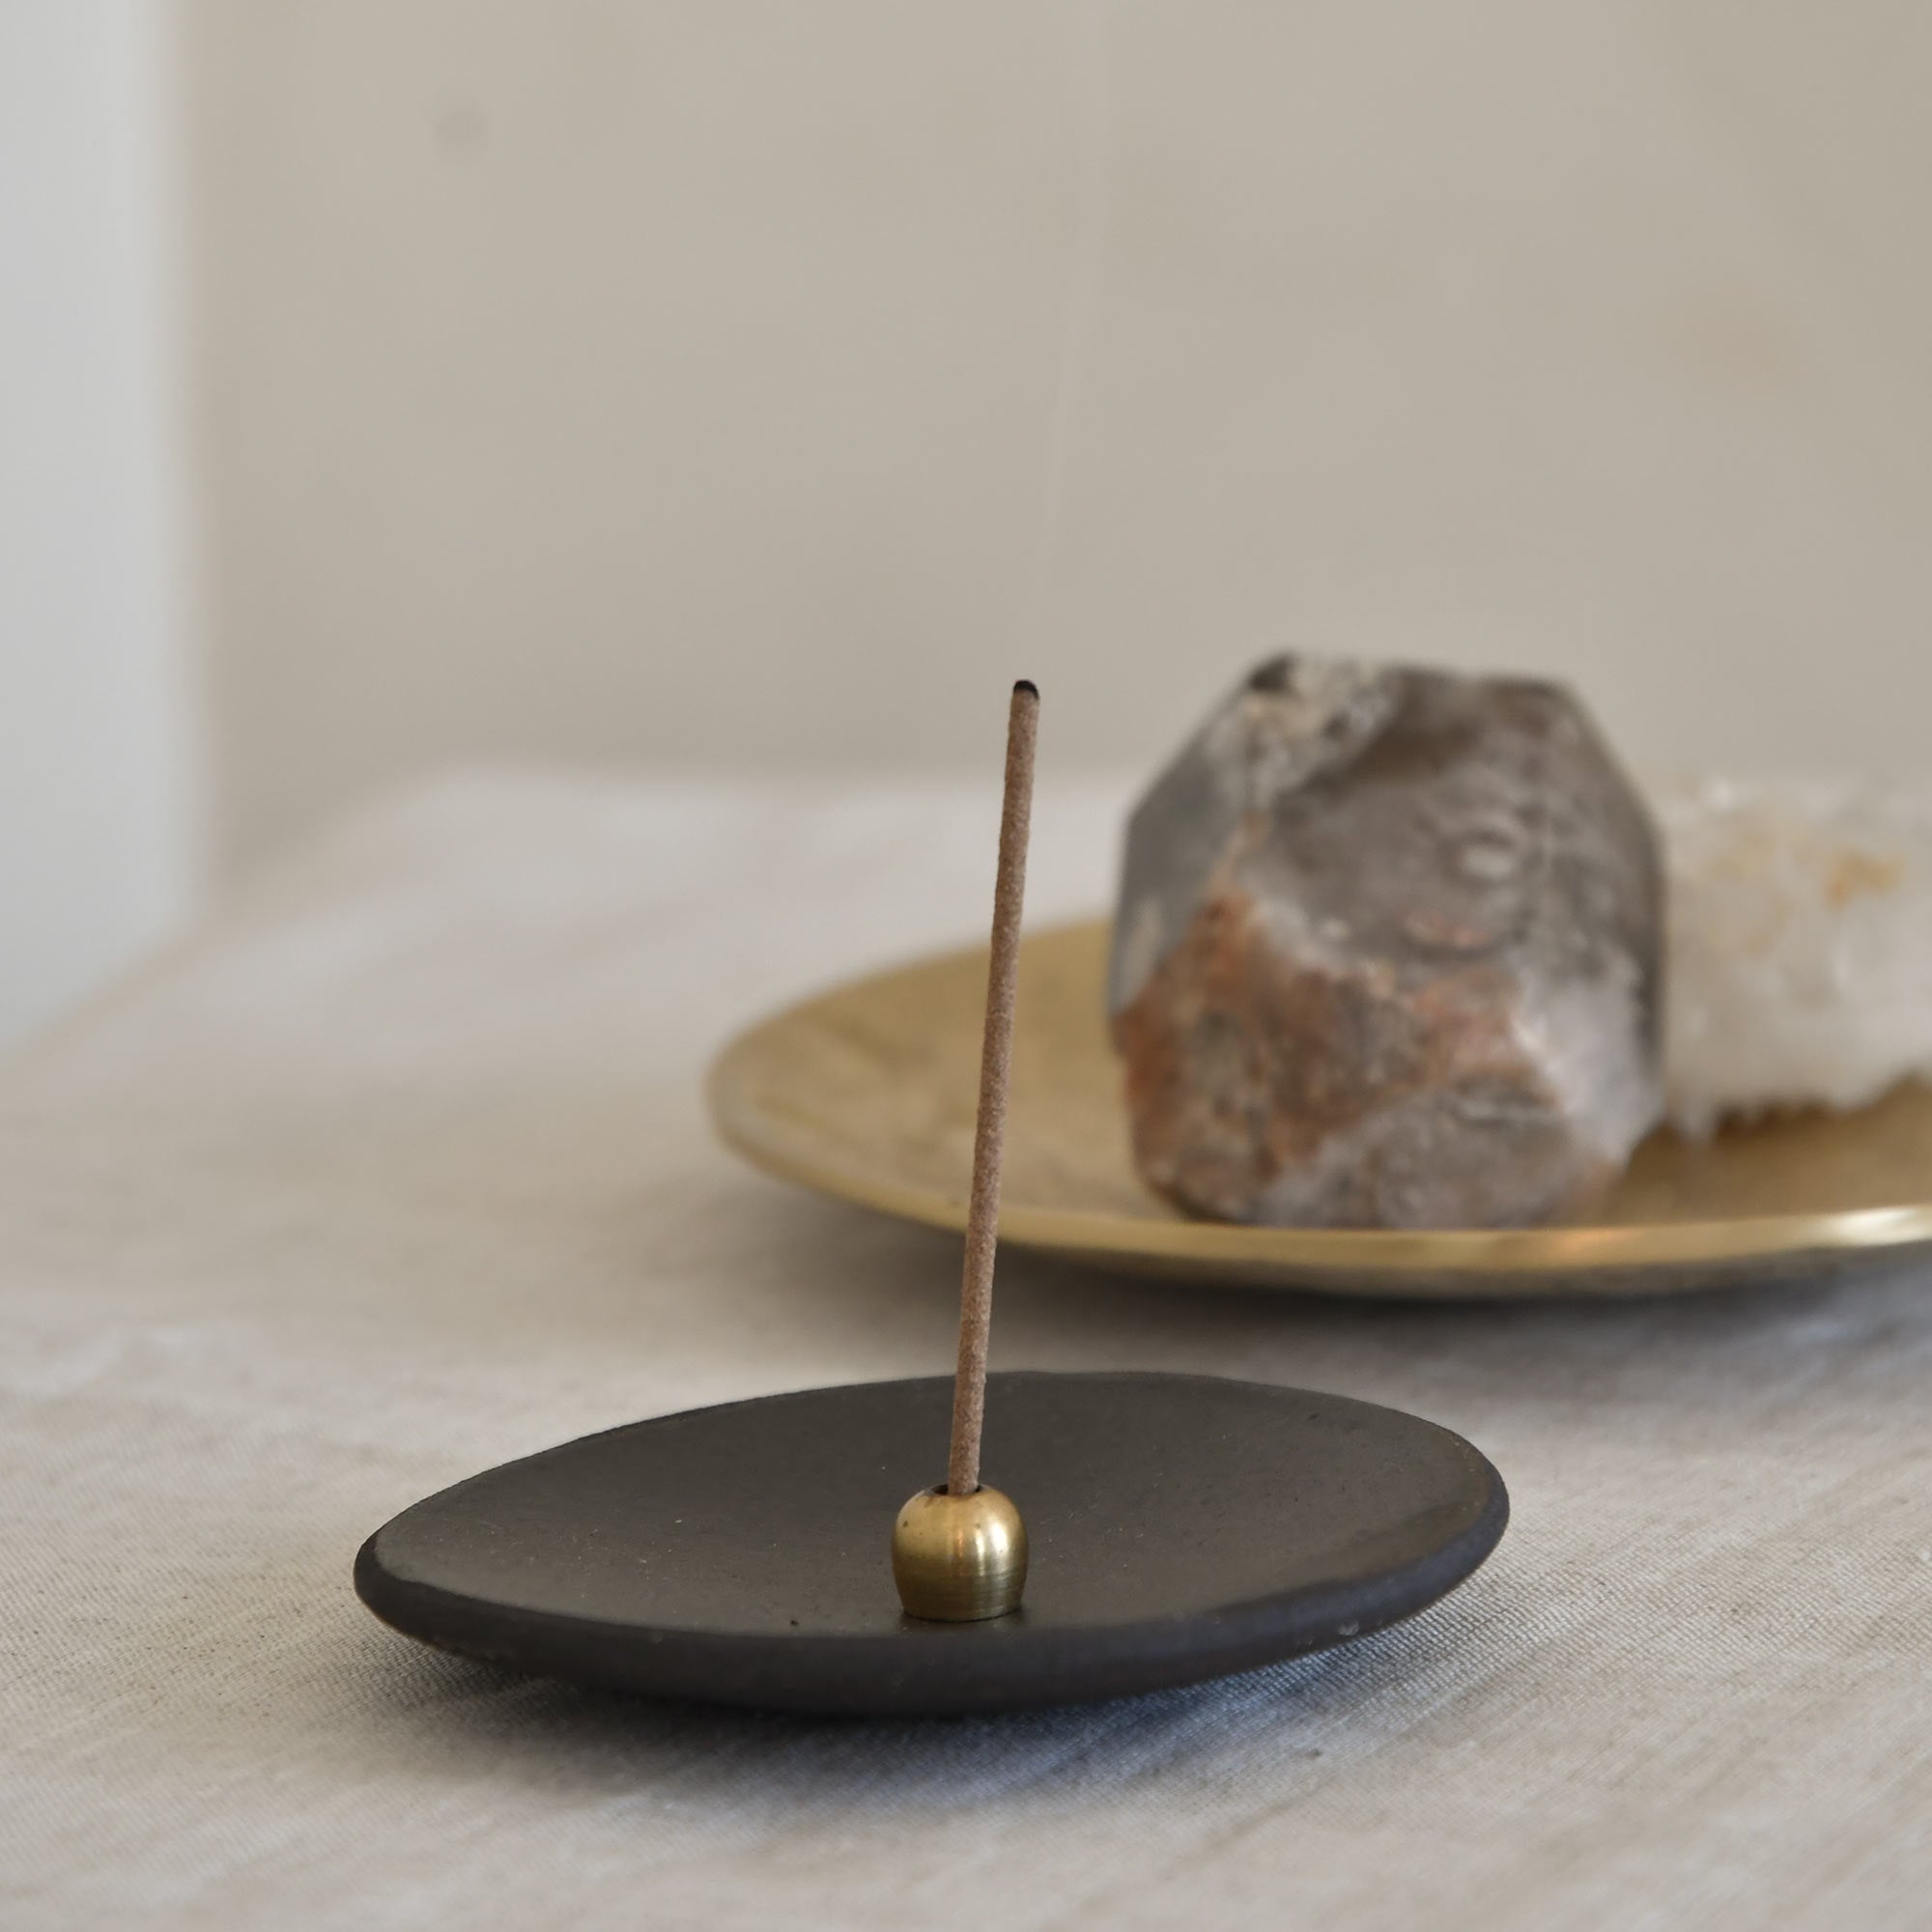 Japanese Incense with an ellipse incense holder and ceramic plate; crystals and metal plate on the behind